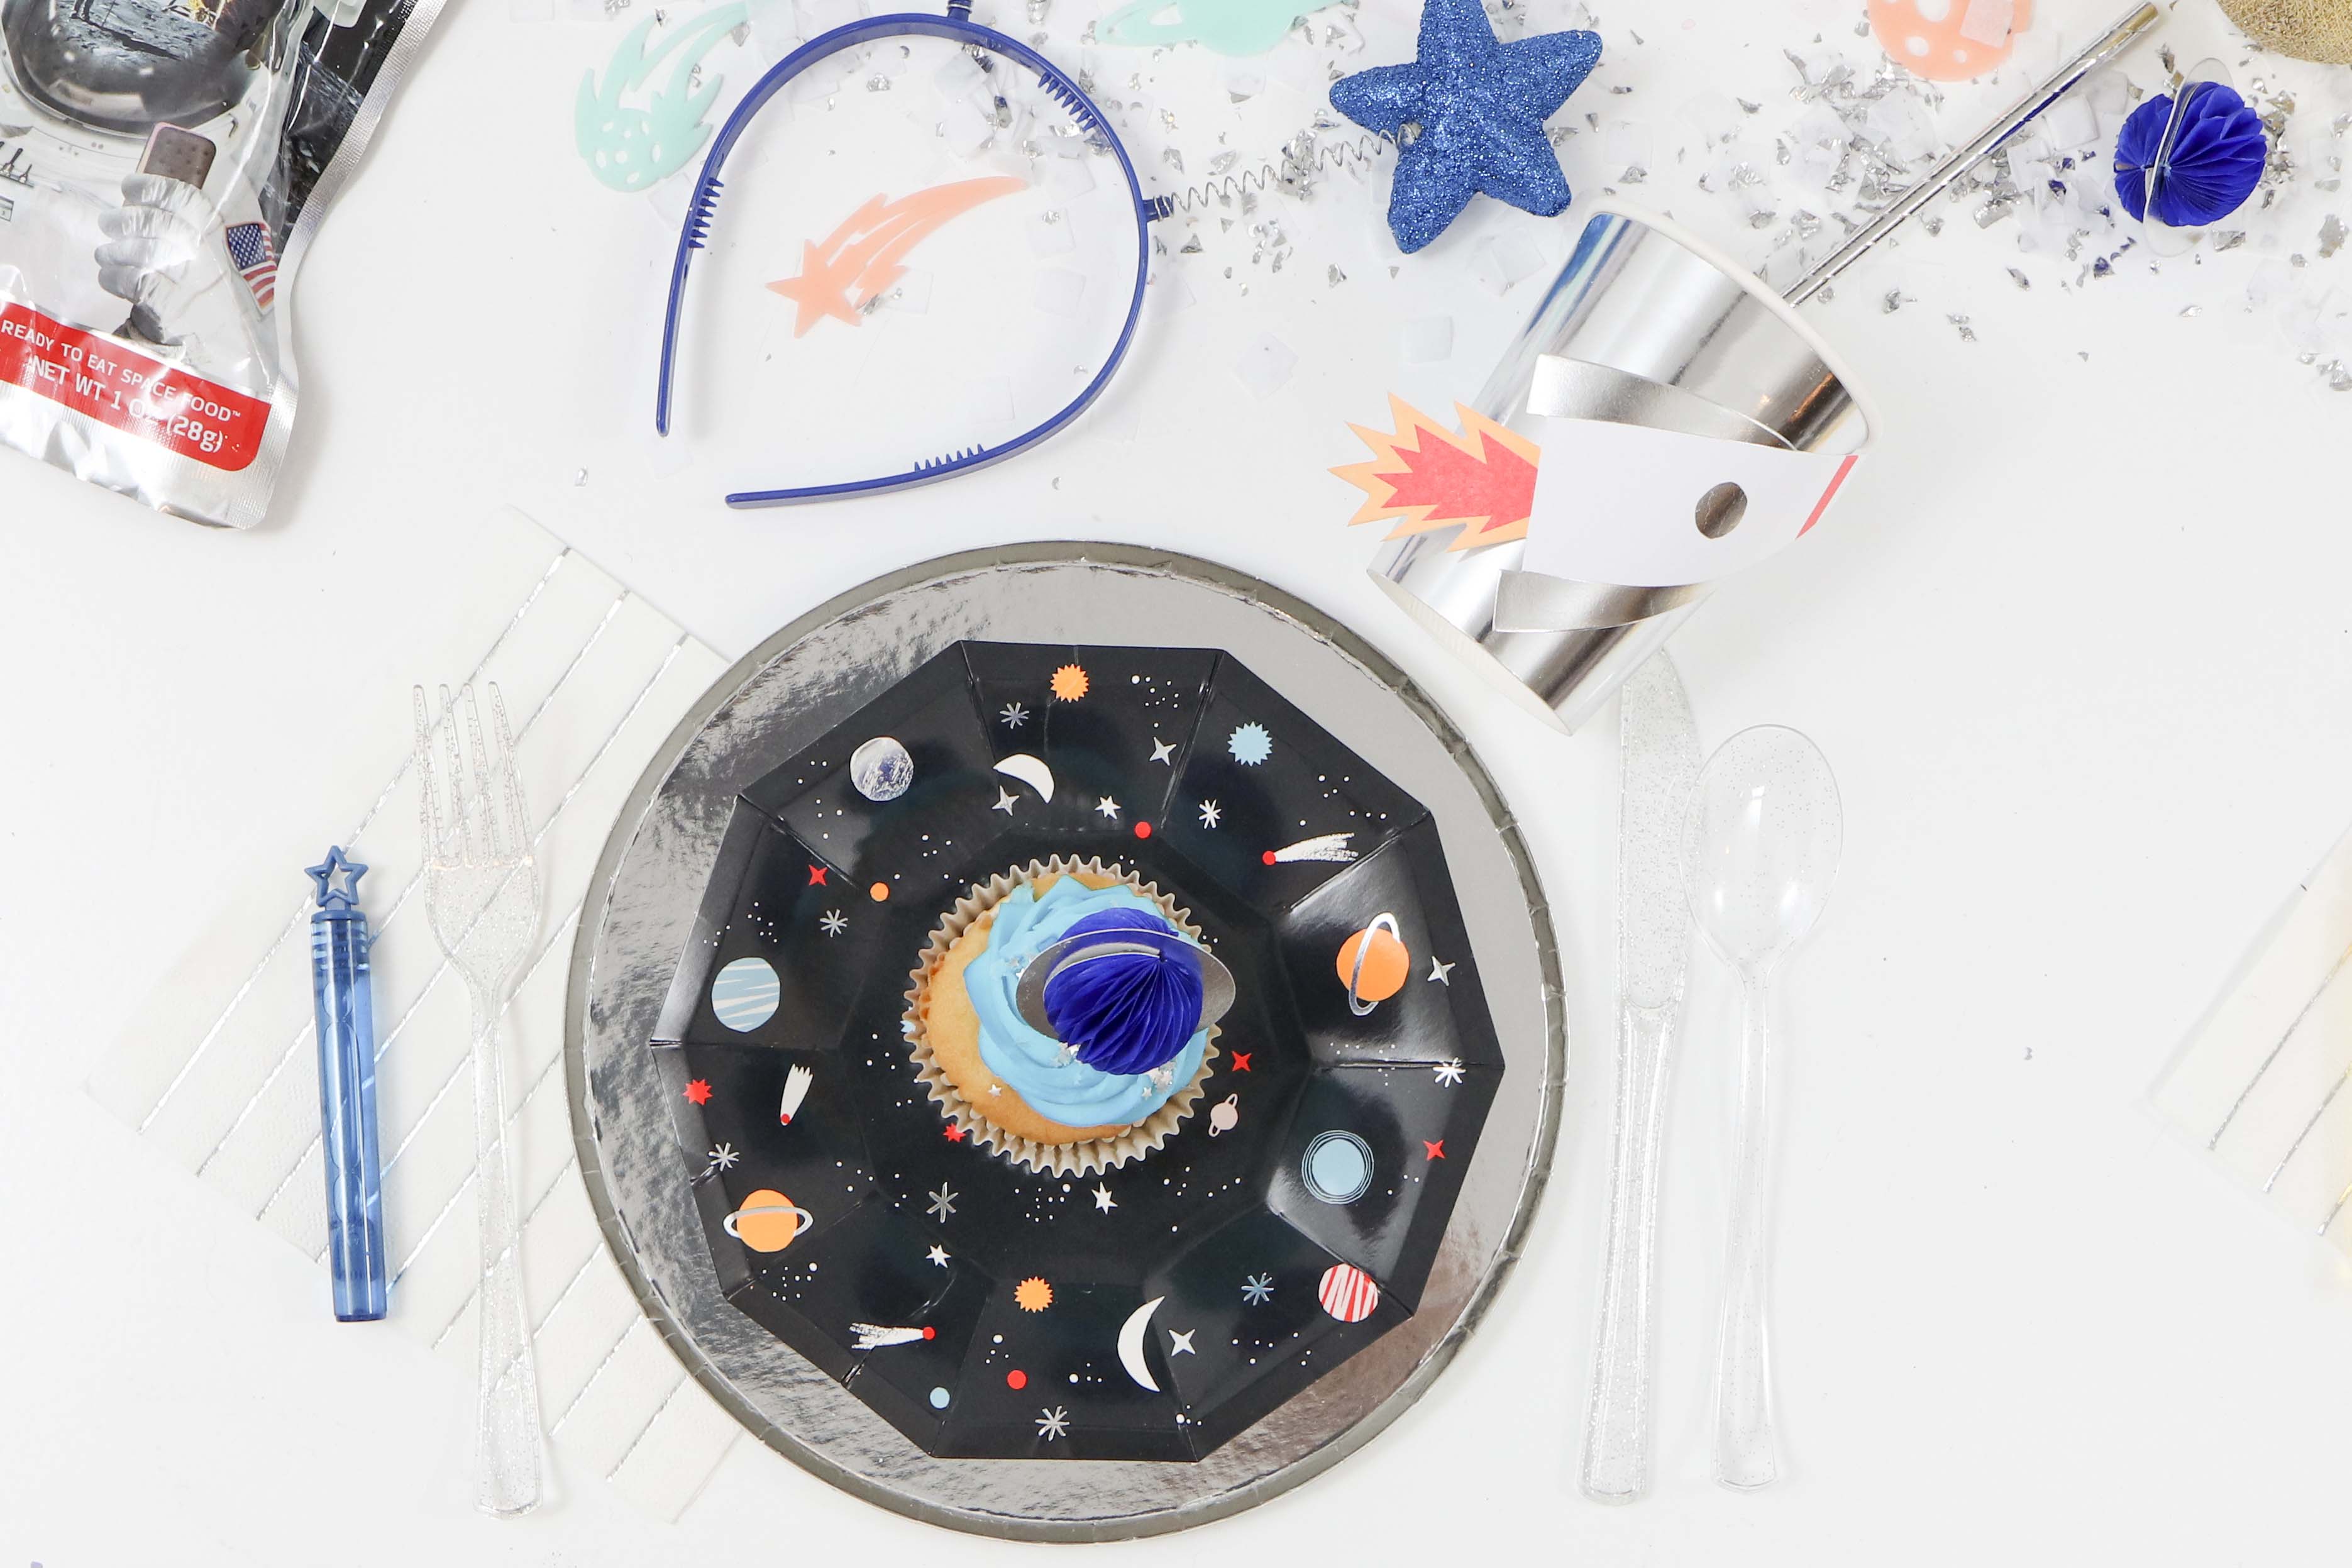 Space Party Place Settings - Looking to throw a Space or Rocket themed birthday? Check out this game-changing “party in a box” recommendation as well as tips for personalizing the party! Get details now at fernandmaple.com.